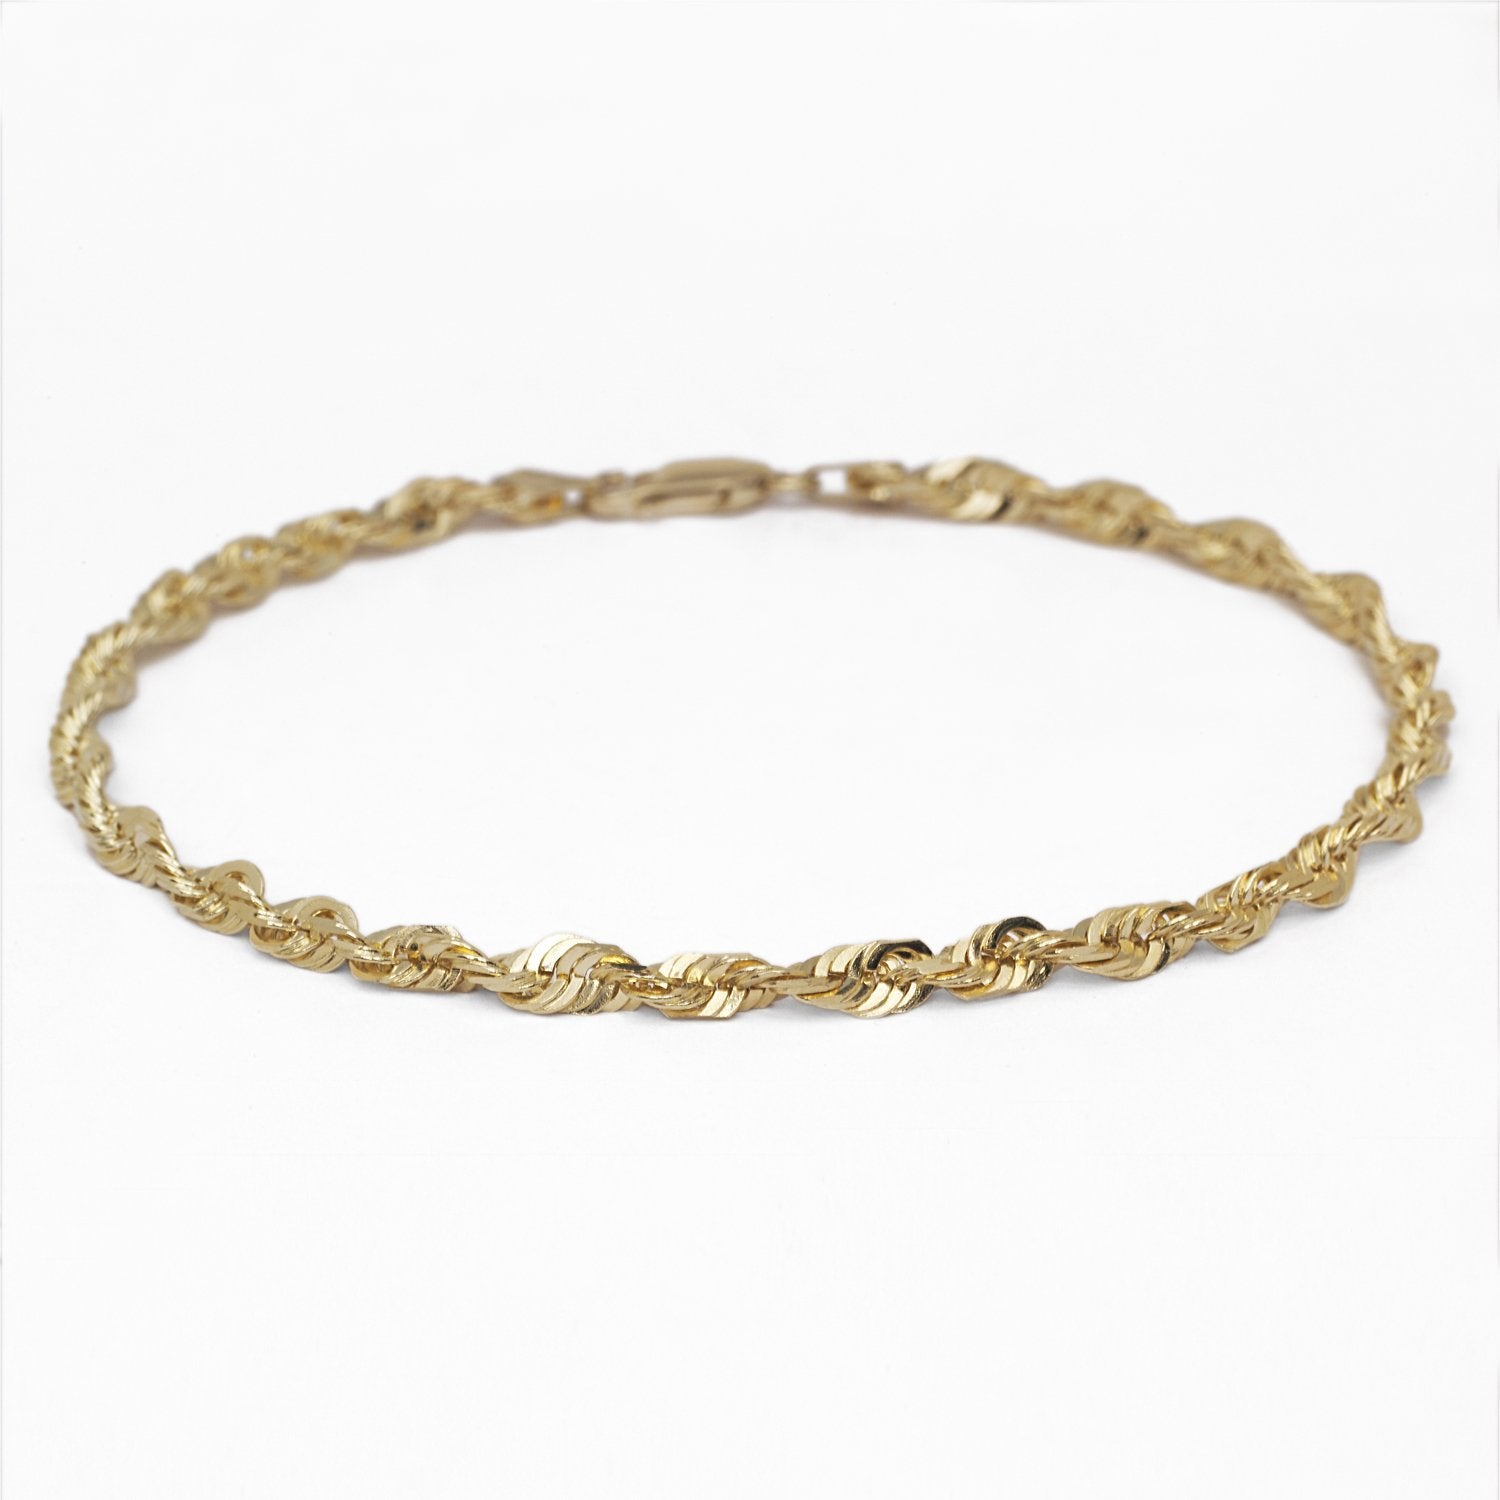 10k Yellow Gold Solid Diamond Cut Rope Chain Bracelet and Anklet, 5mm